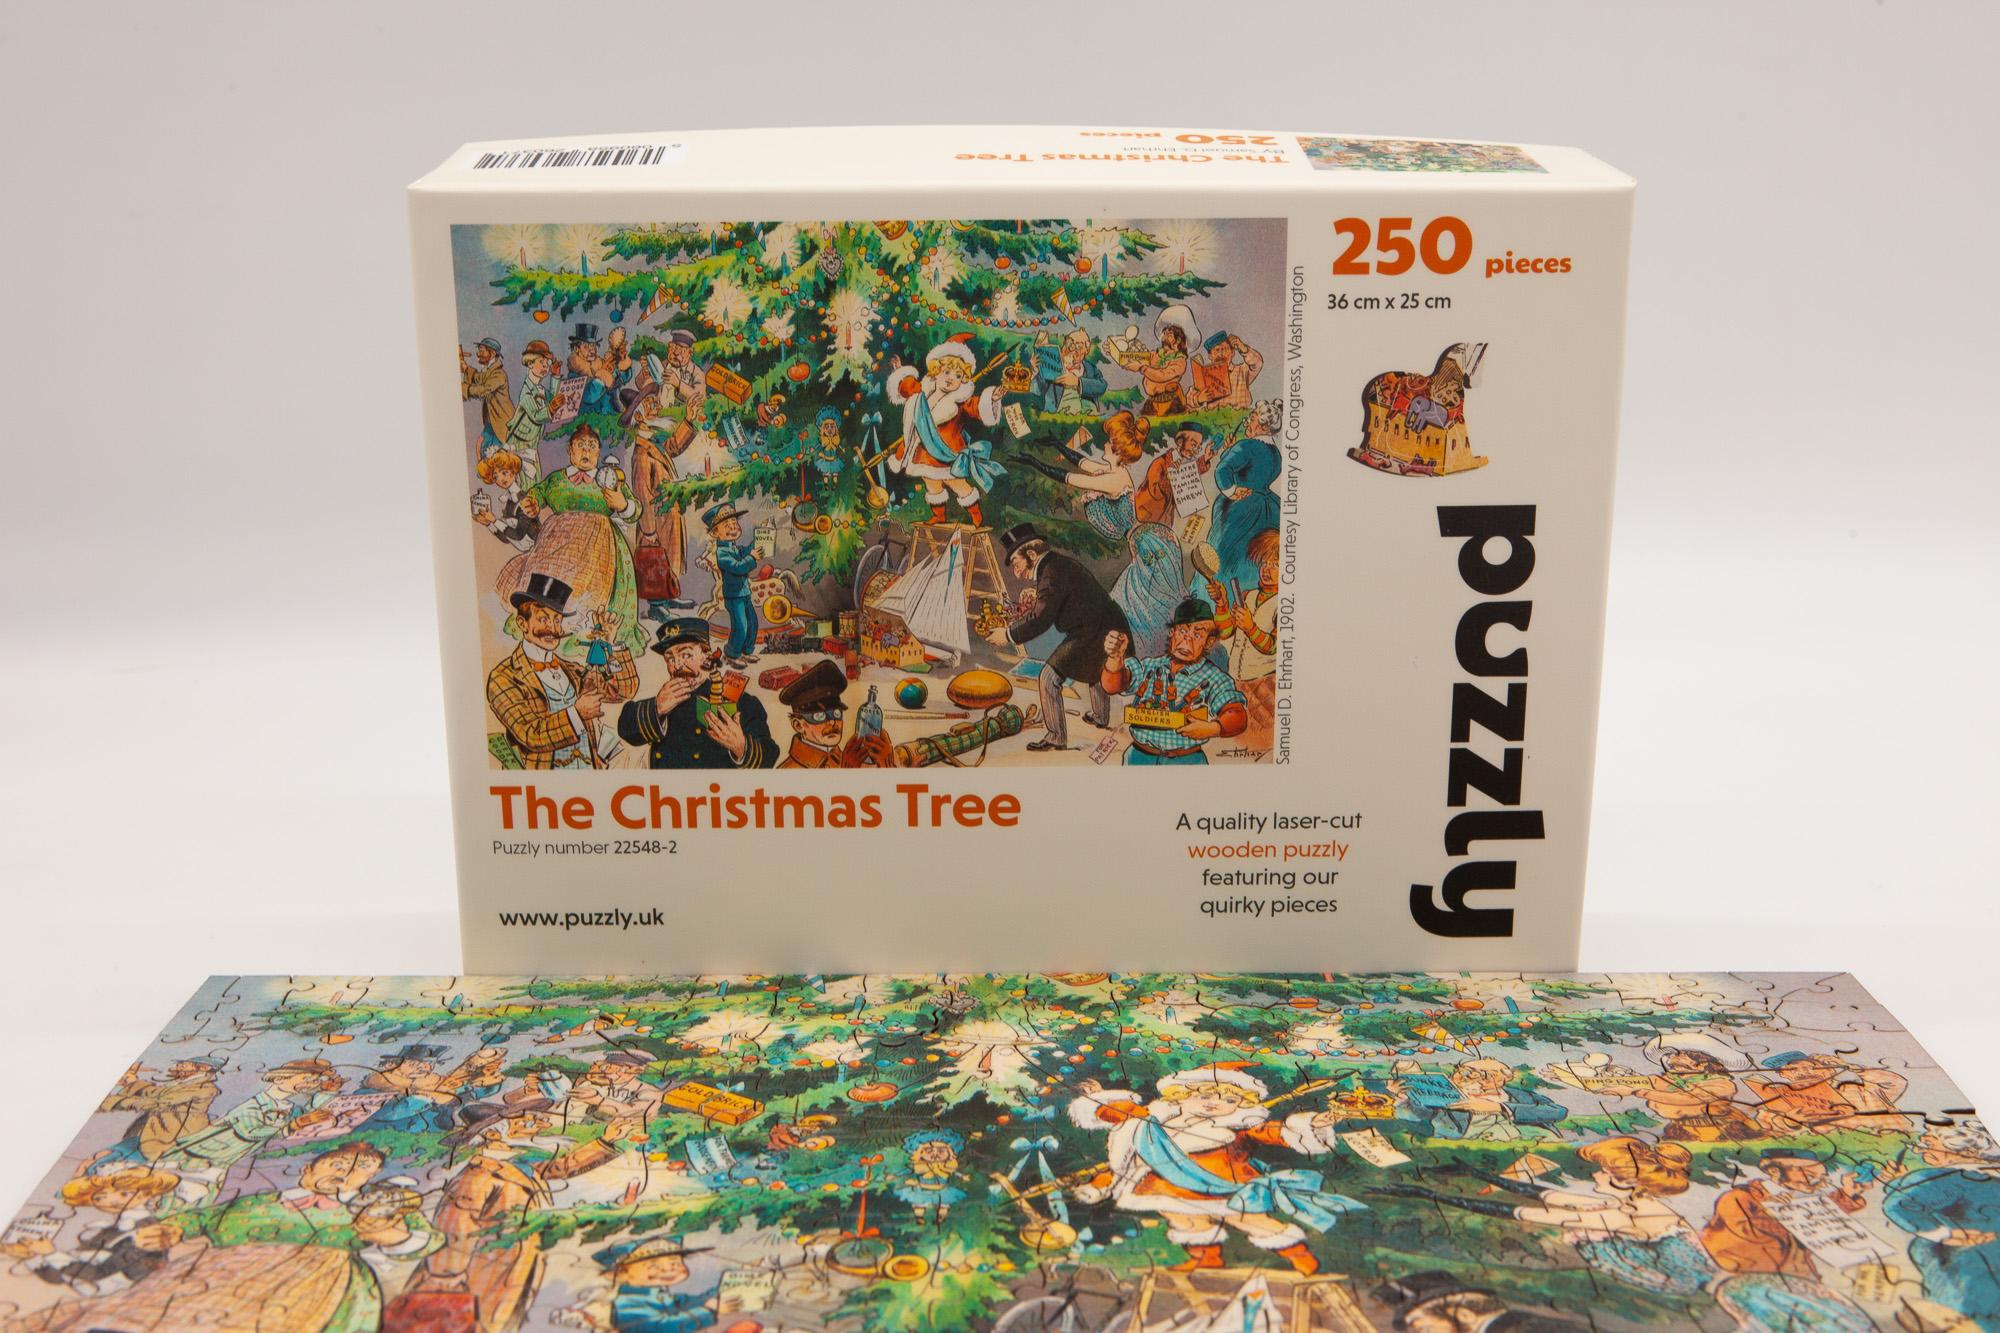 The Christmas Tree Wooden Puzzle